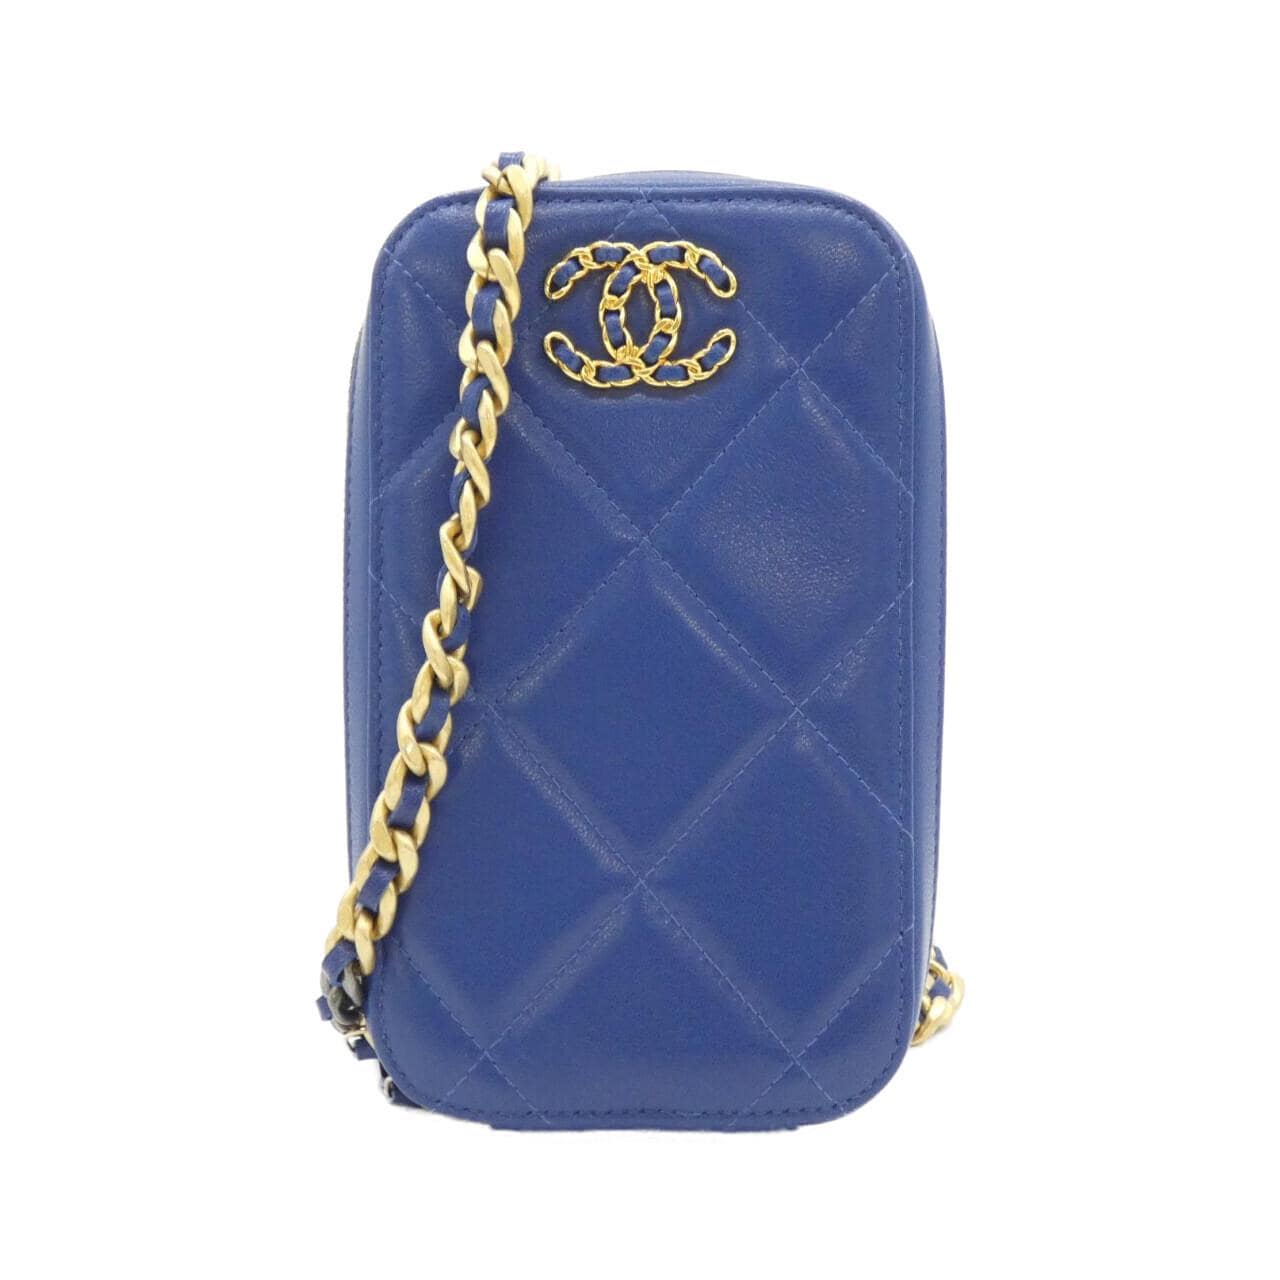 CHANEL CHANEL 19 Line Phone Case